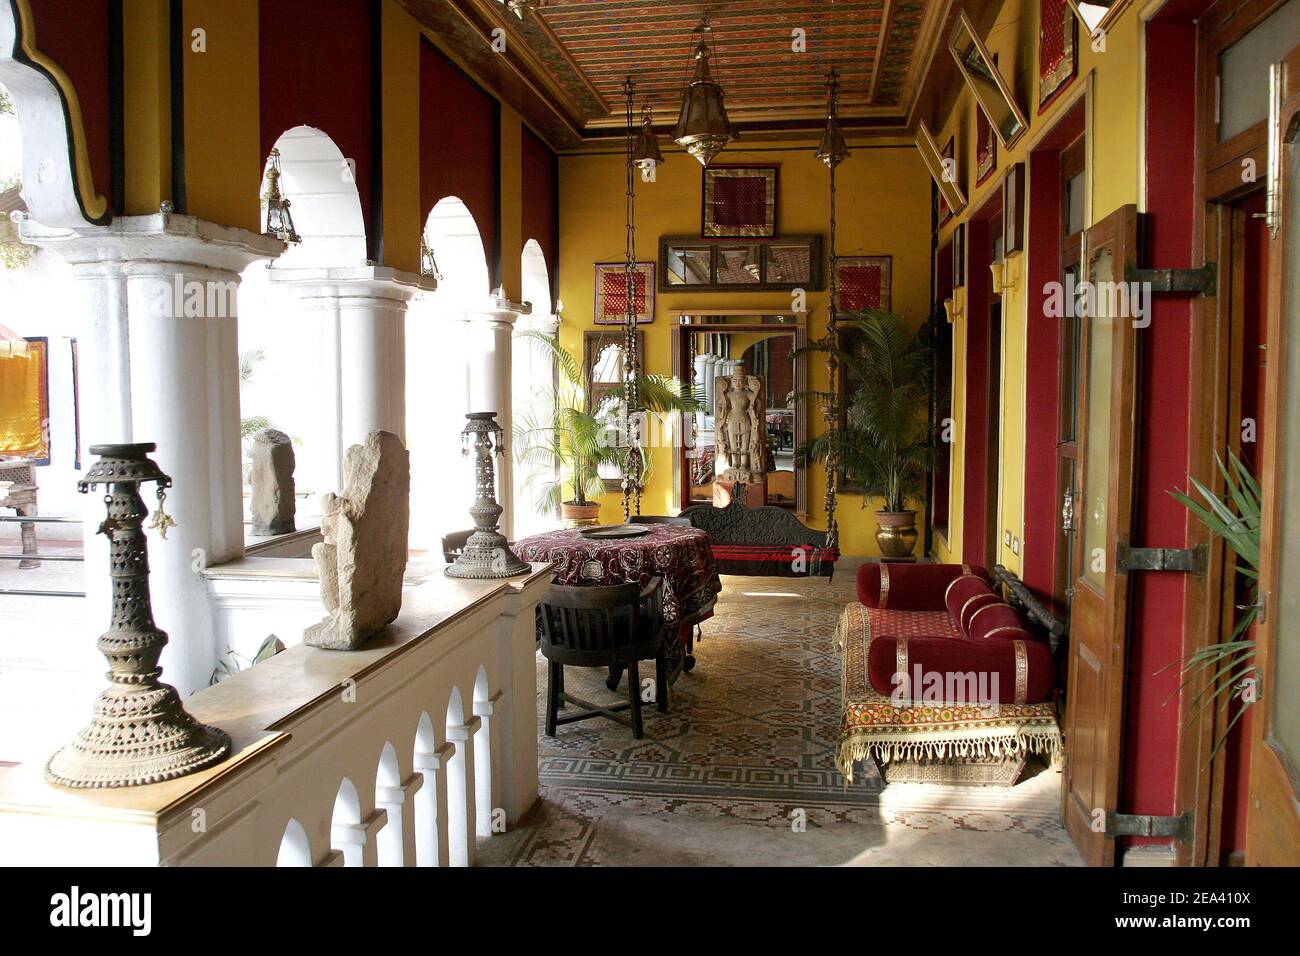 EXCLUSIVE. Inside view of the recently restored palace of Umang Hutheesing, Lord of Ahmedabad, in Ahmedabad, Gujarat State, India, in March 2005. Photo by Alexis Orand/ABACA. Stock Photo